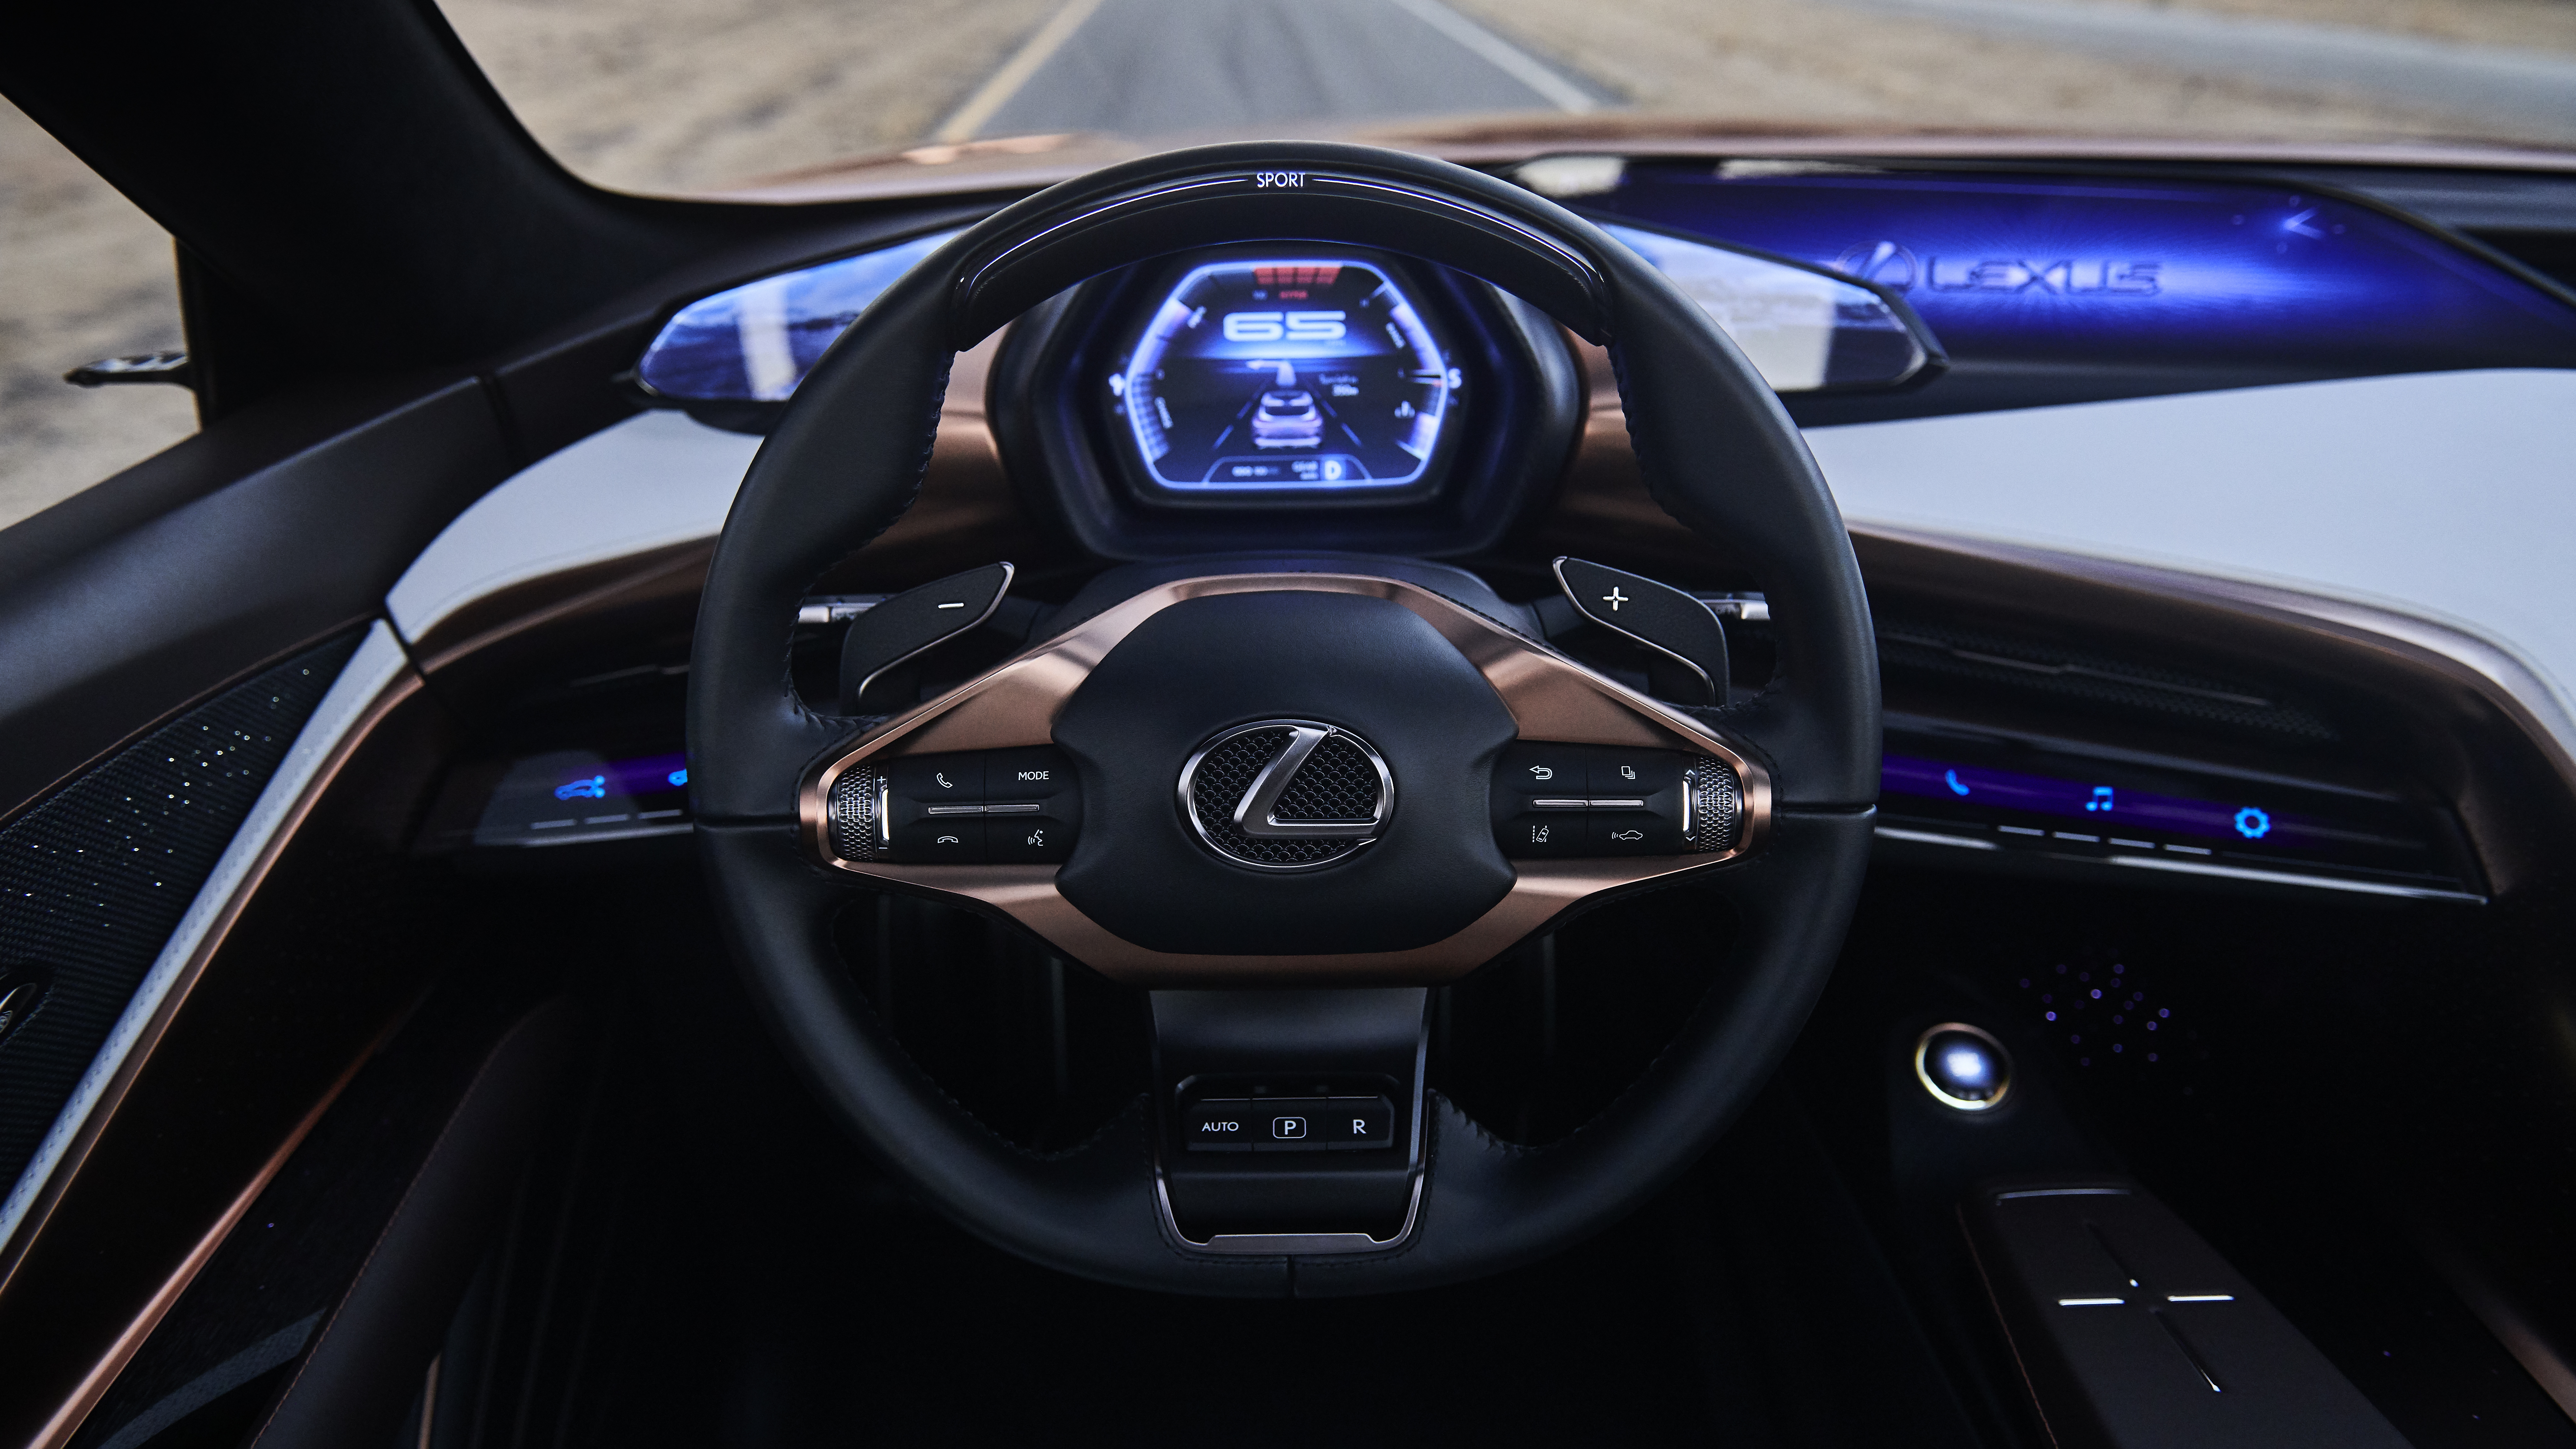 Image: Lexus, LF-1, Limitless, Concept, salon, steering wheel, display, road, buttons, brand